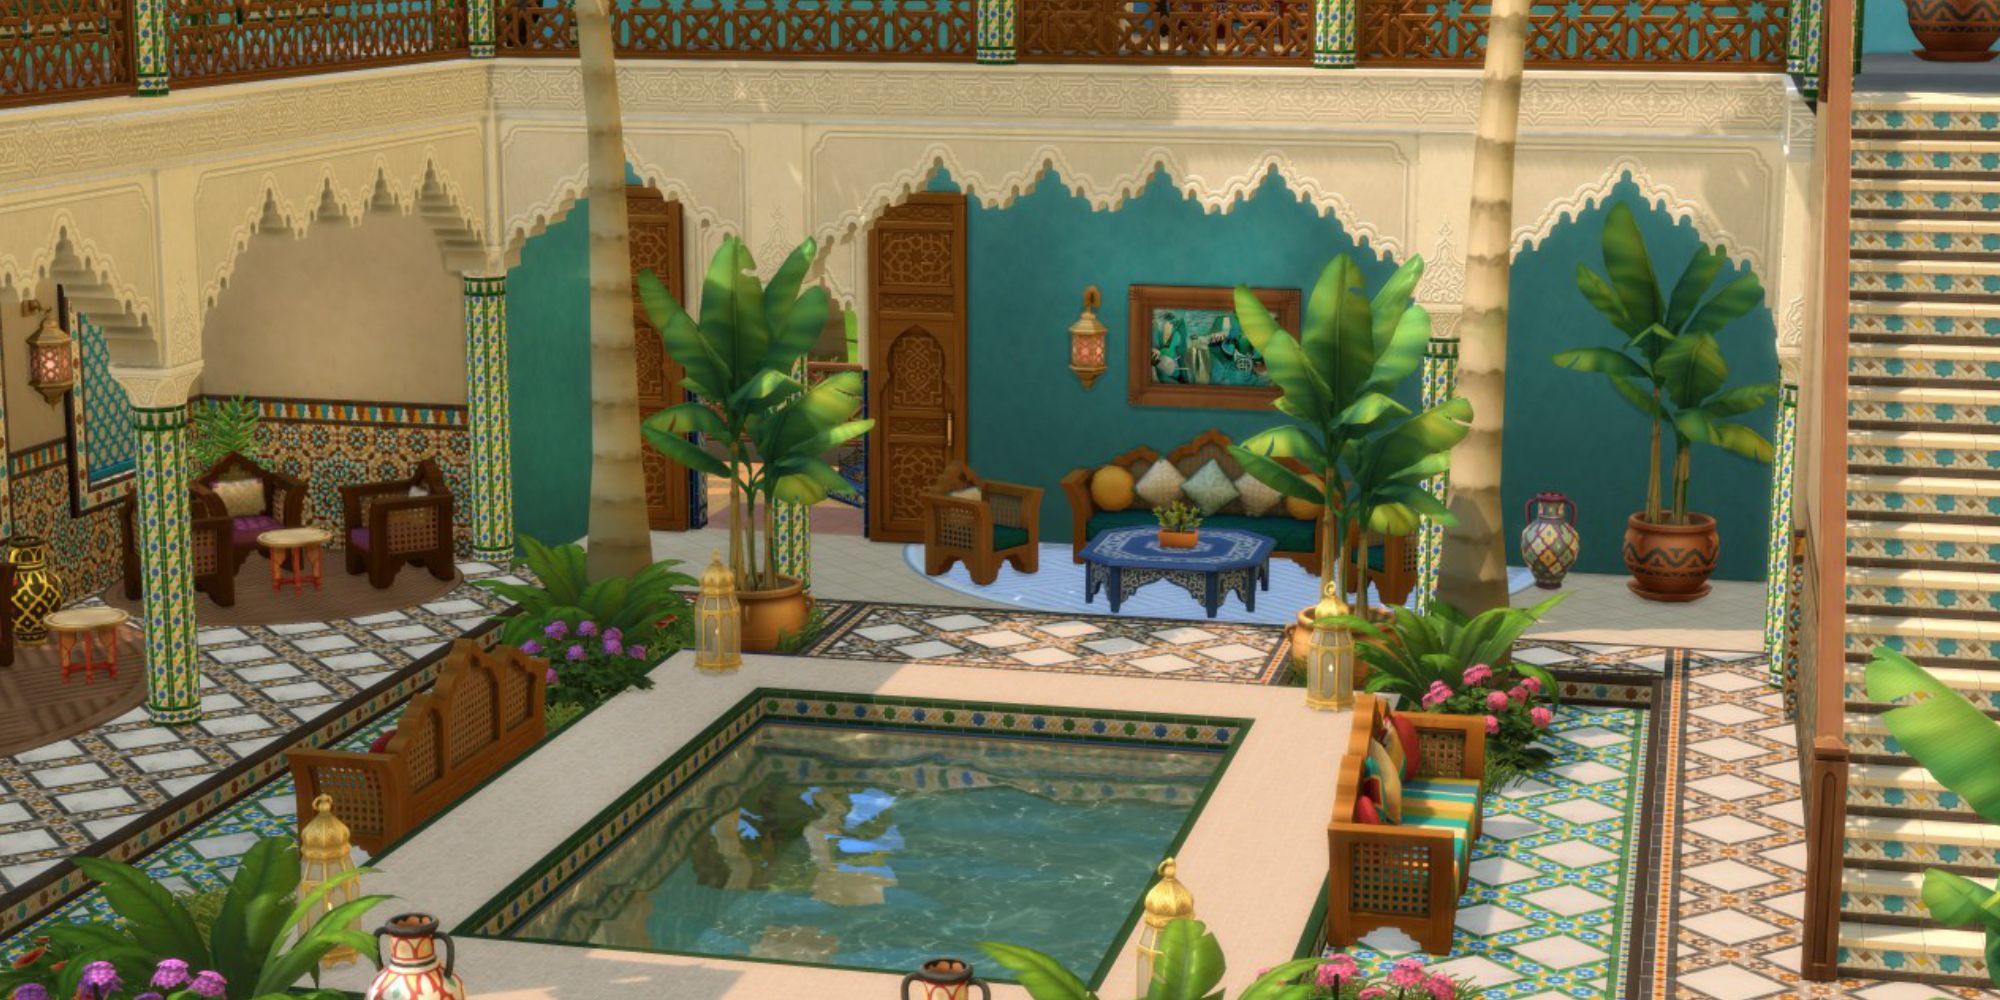 Sims 4 Courtyard oasis kit items making an outdoor area